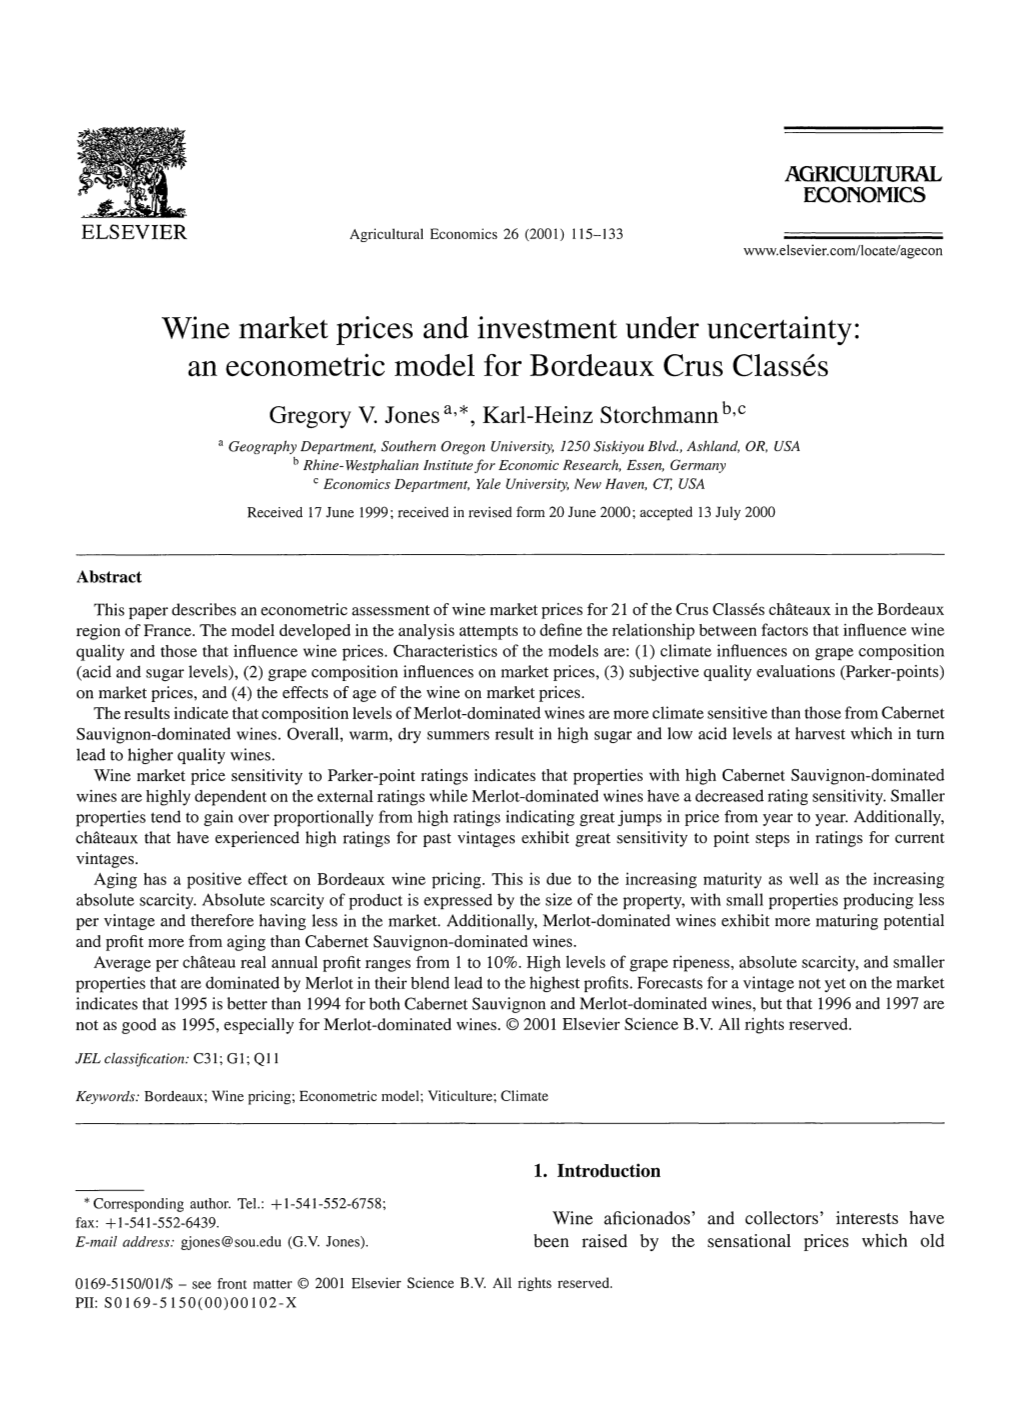 Wine Market Prices and Investment Under Uncertainty: an Econometric Model for Bordeaux Crus Classes